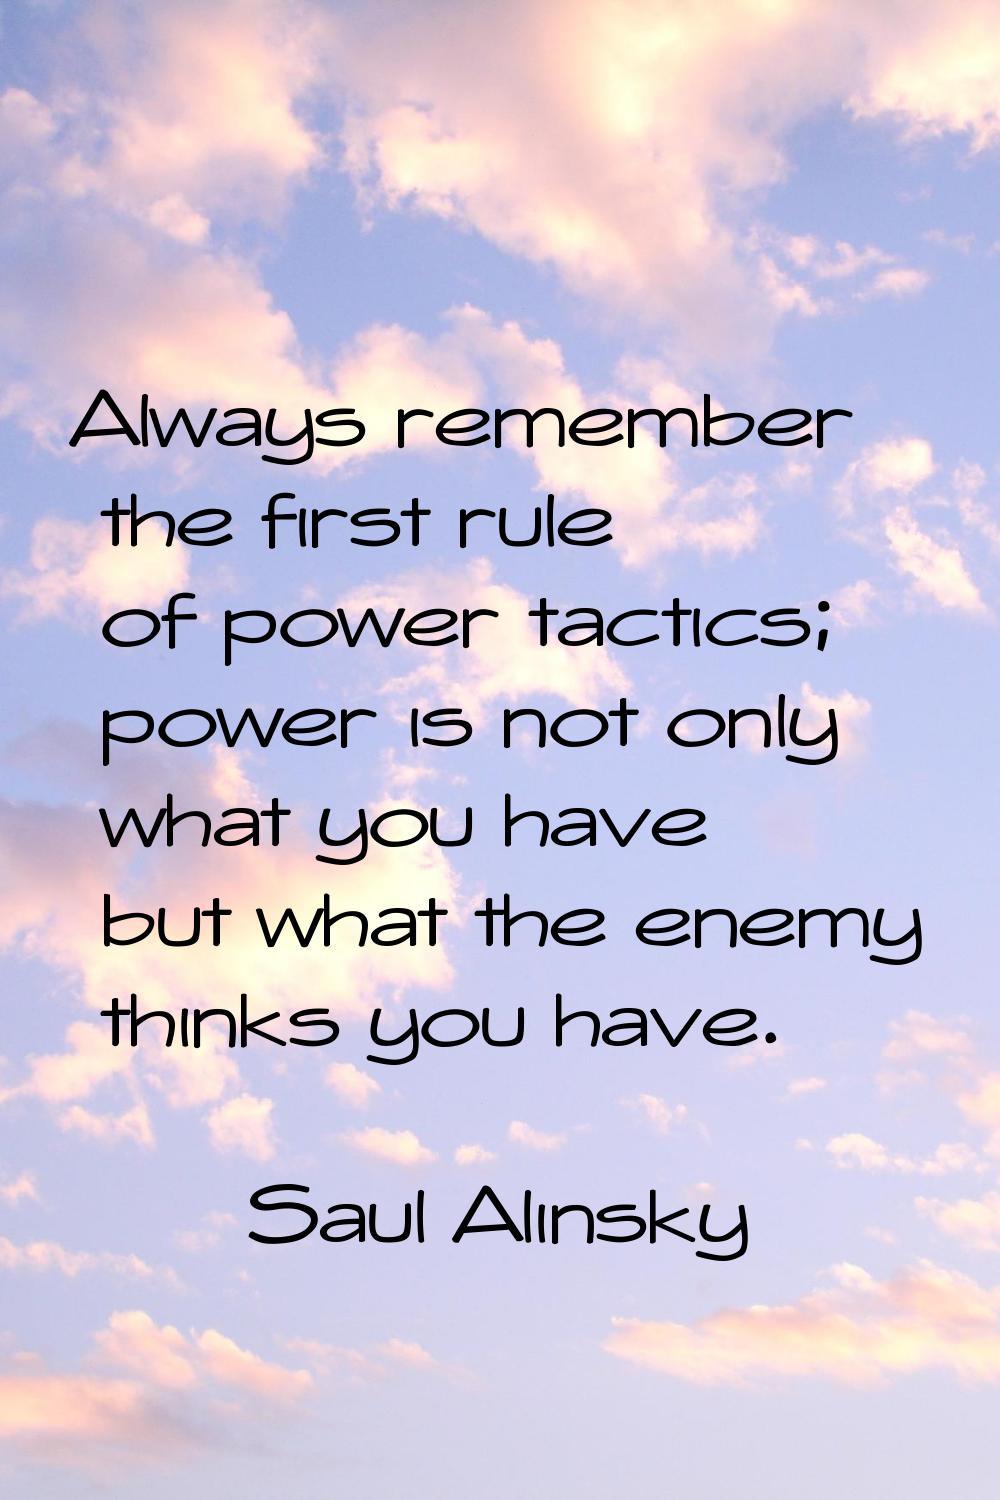 Always remember the first rule of power tactics; power is not only what you have but what the enemy